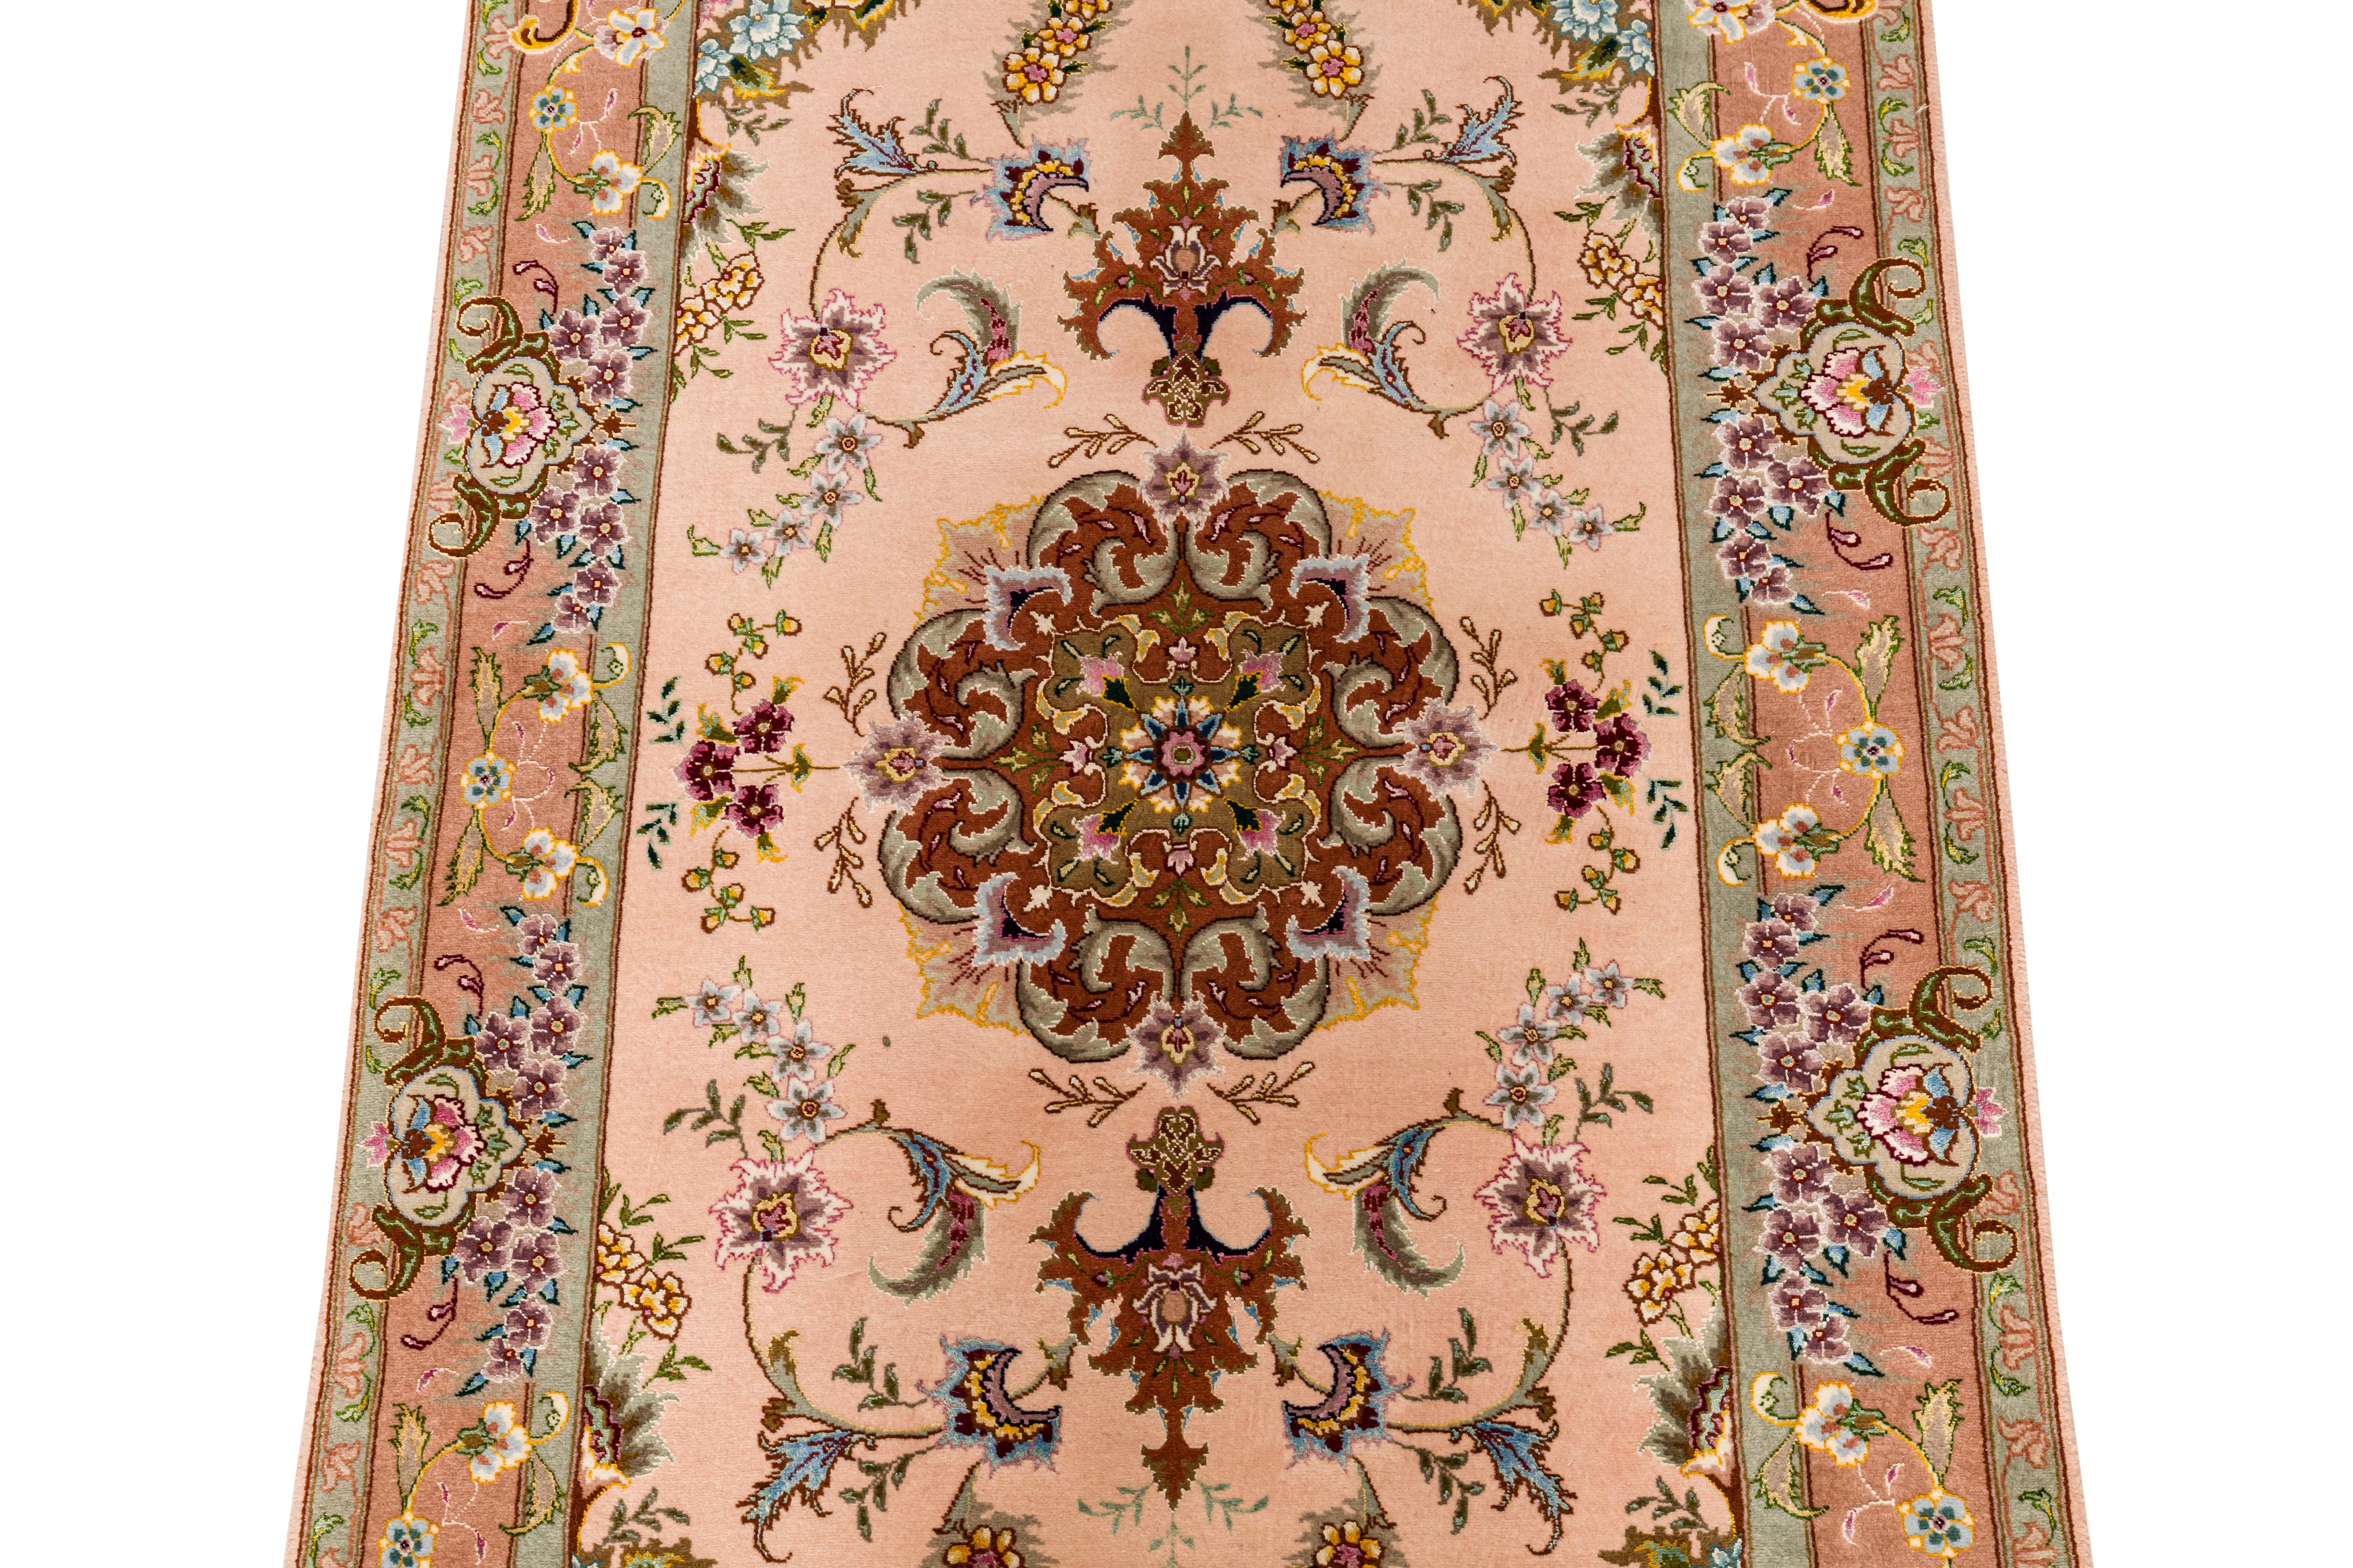 A VERY FINE PART SILK TABRIZ RUNNER, NORTH-WEST PERSIA - Image 3 of 8